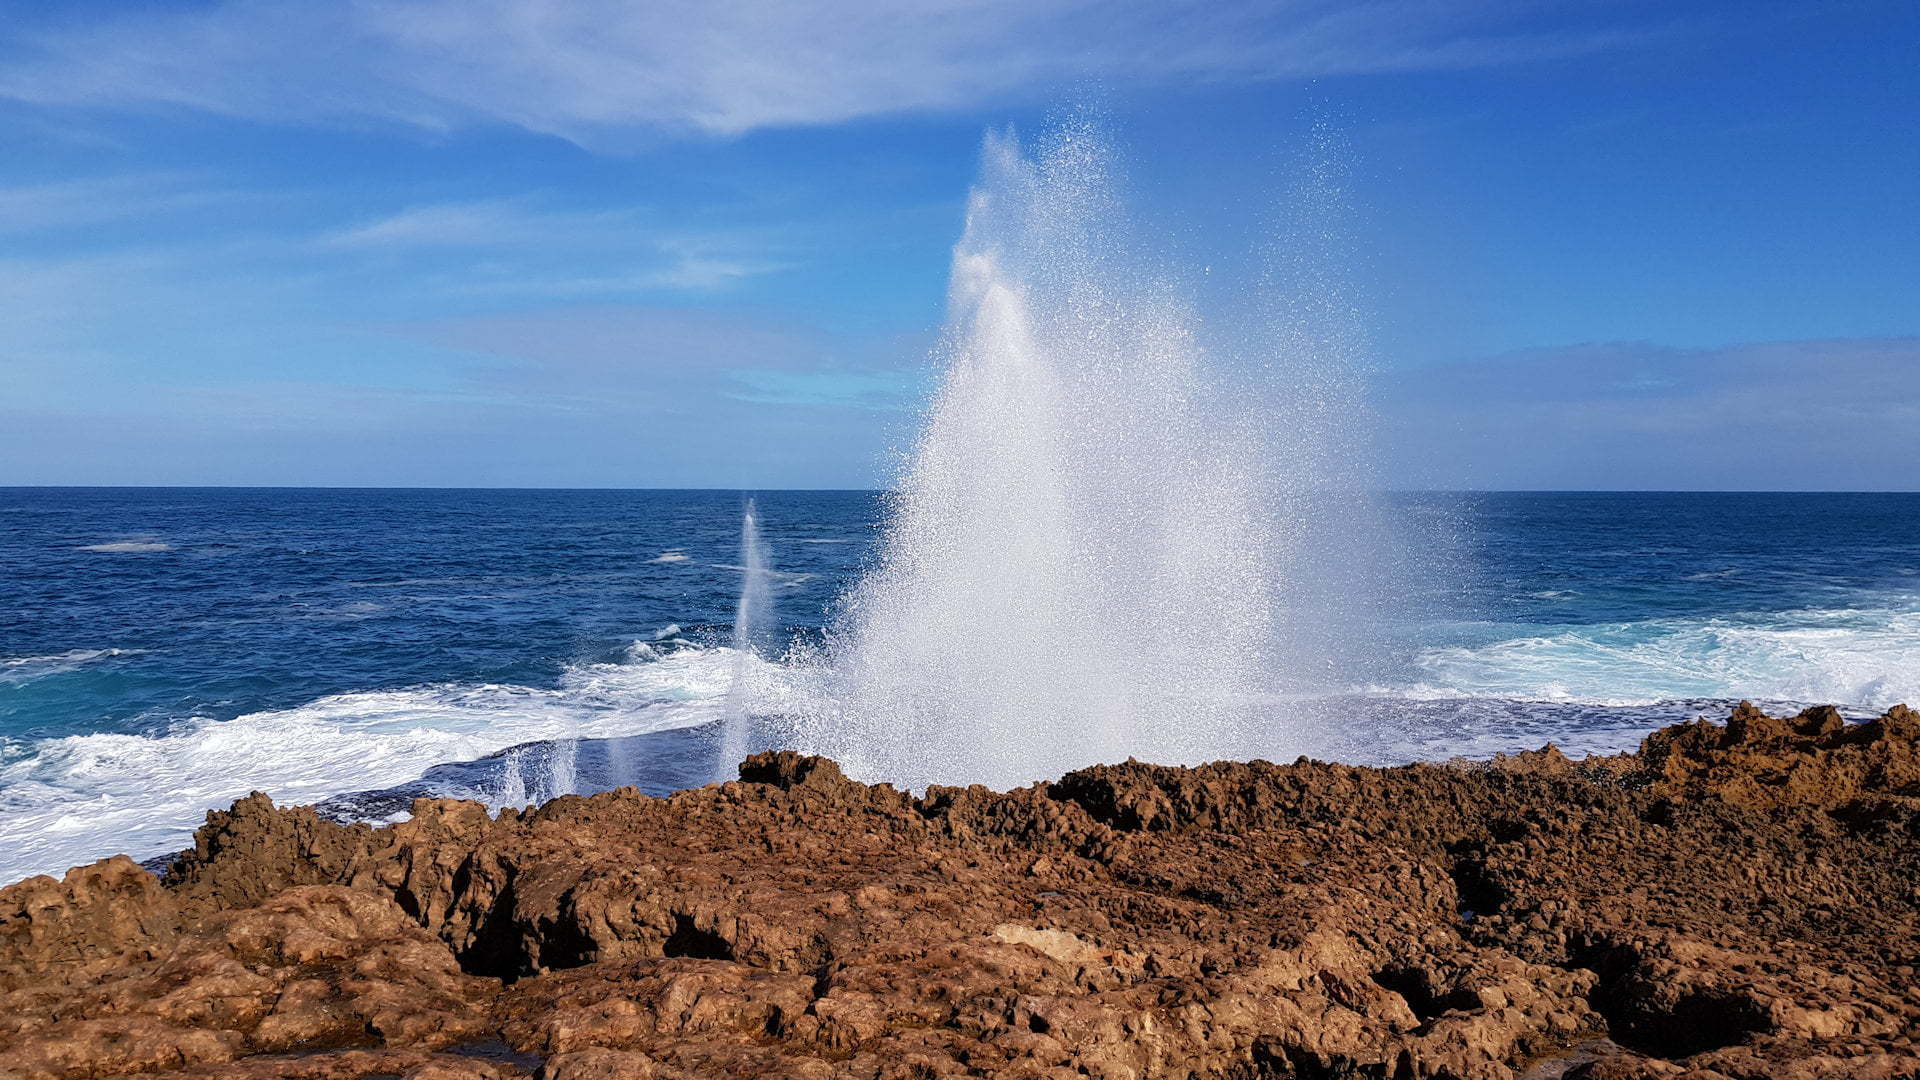 Water blowhole on a rocky coastline at the Blowholes in Western Australia